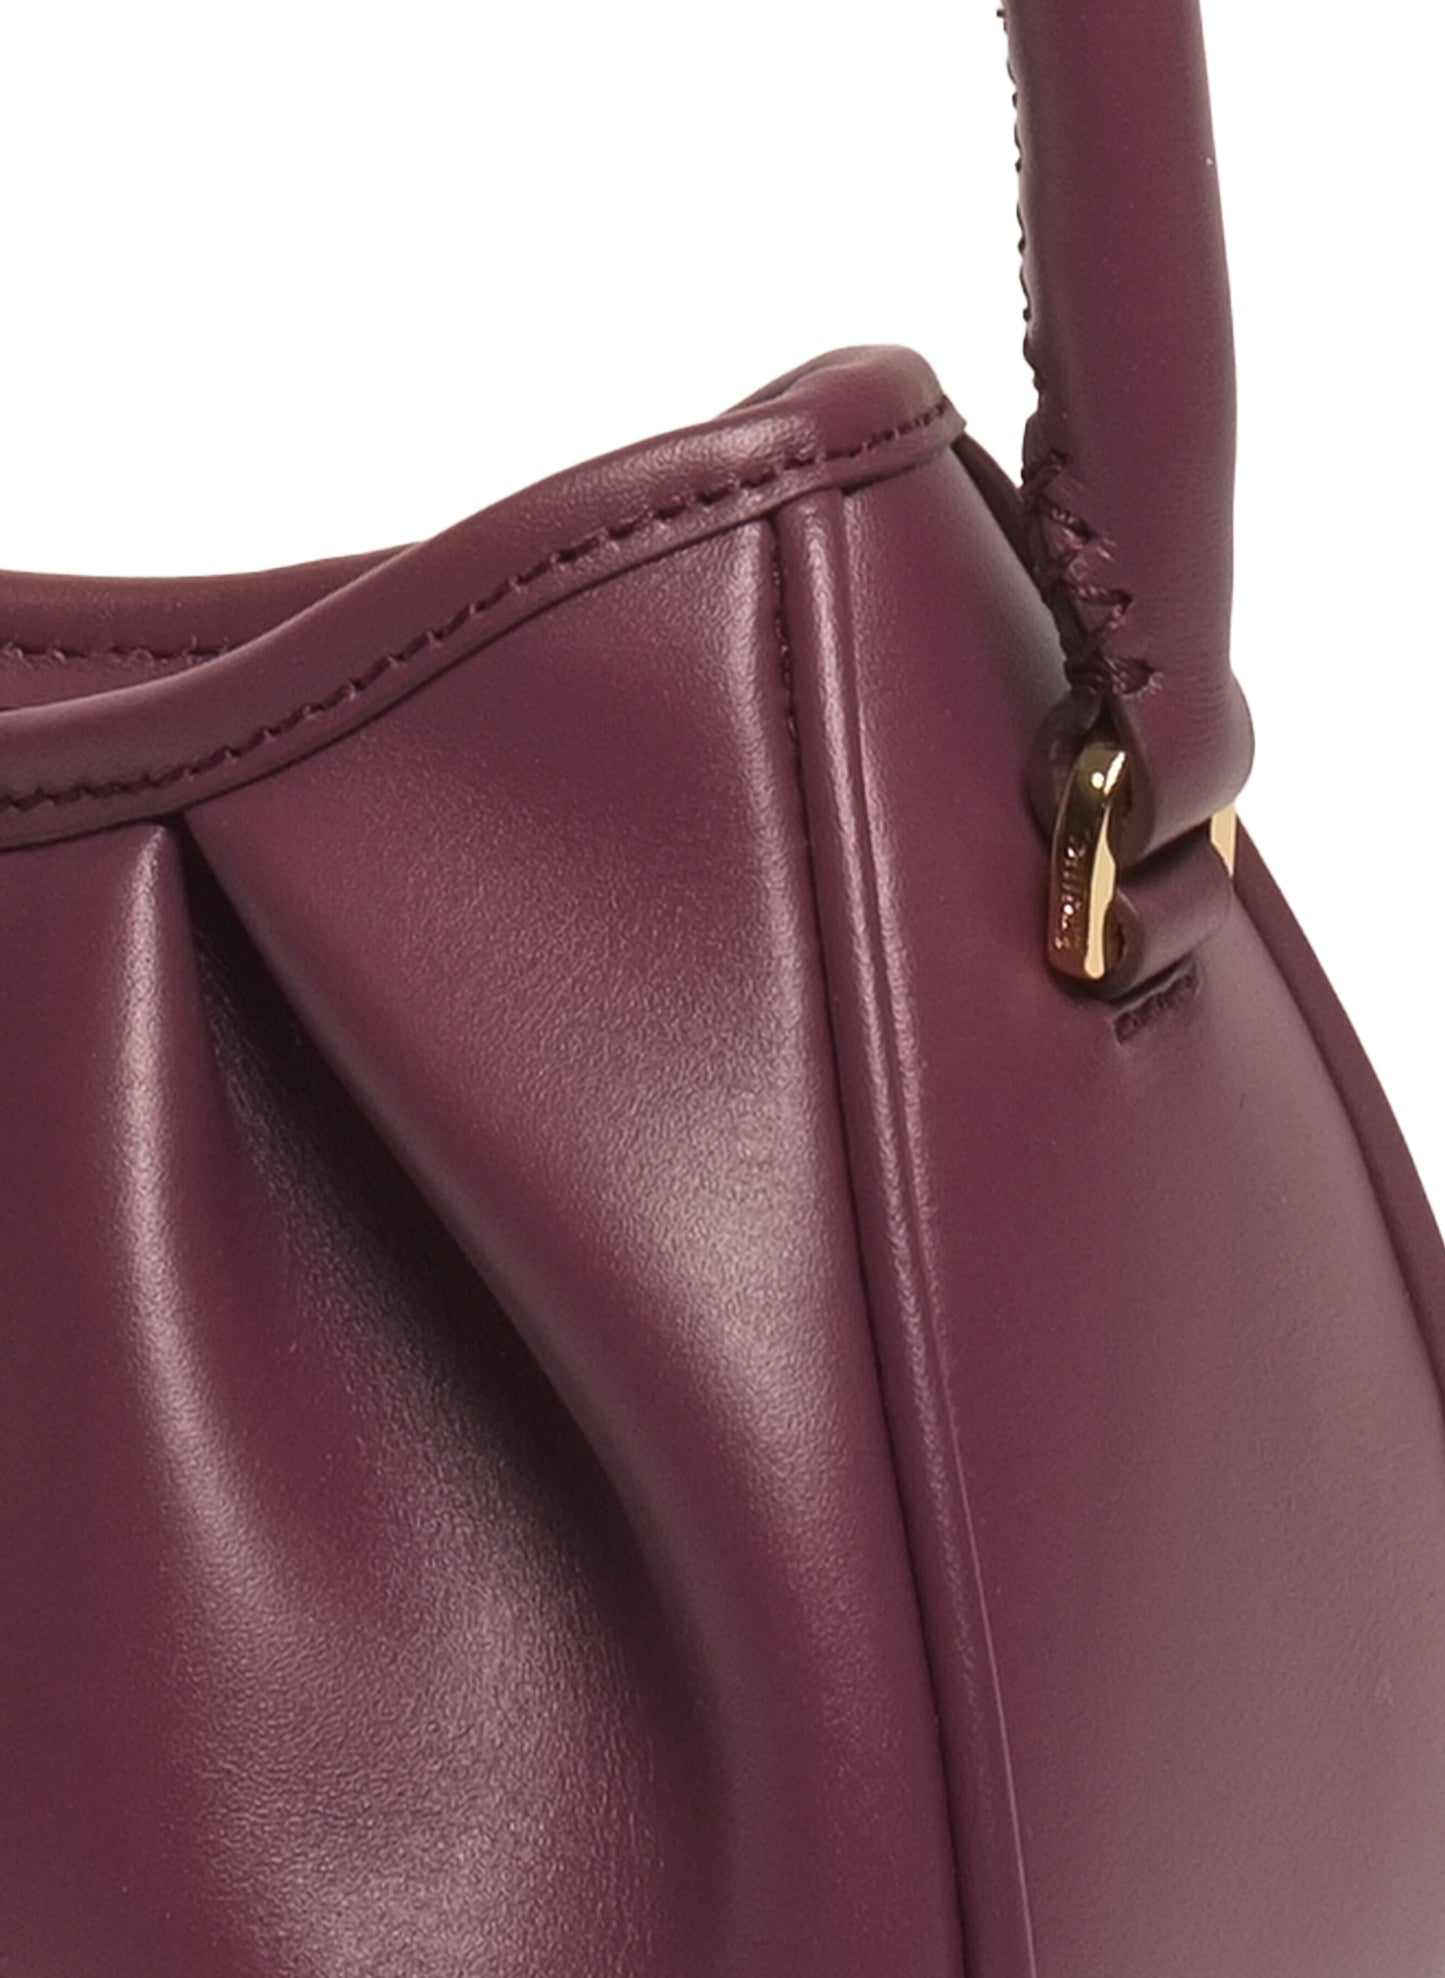 Small Dimple Leather Violet